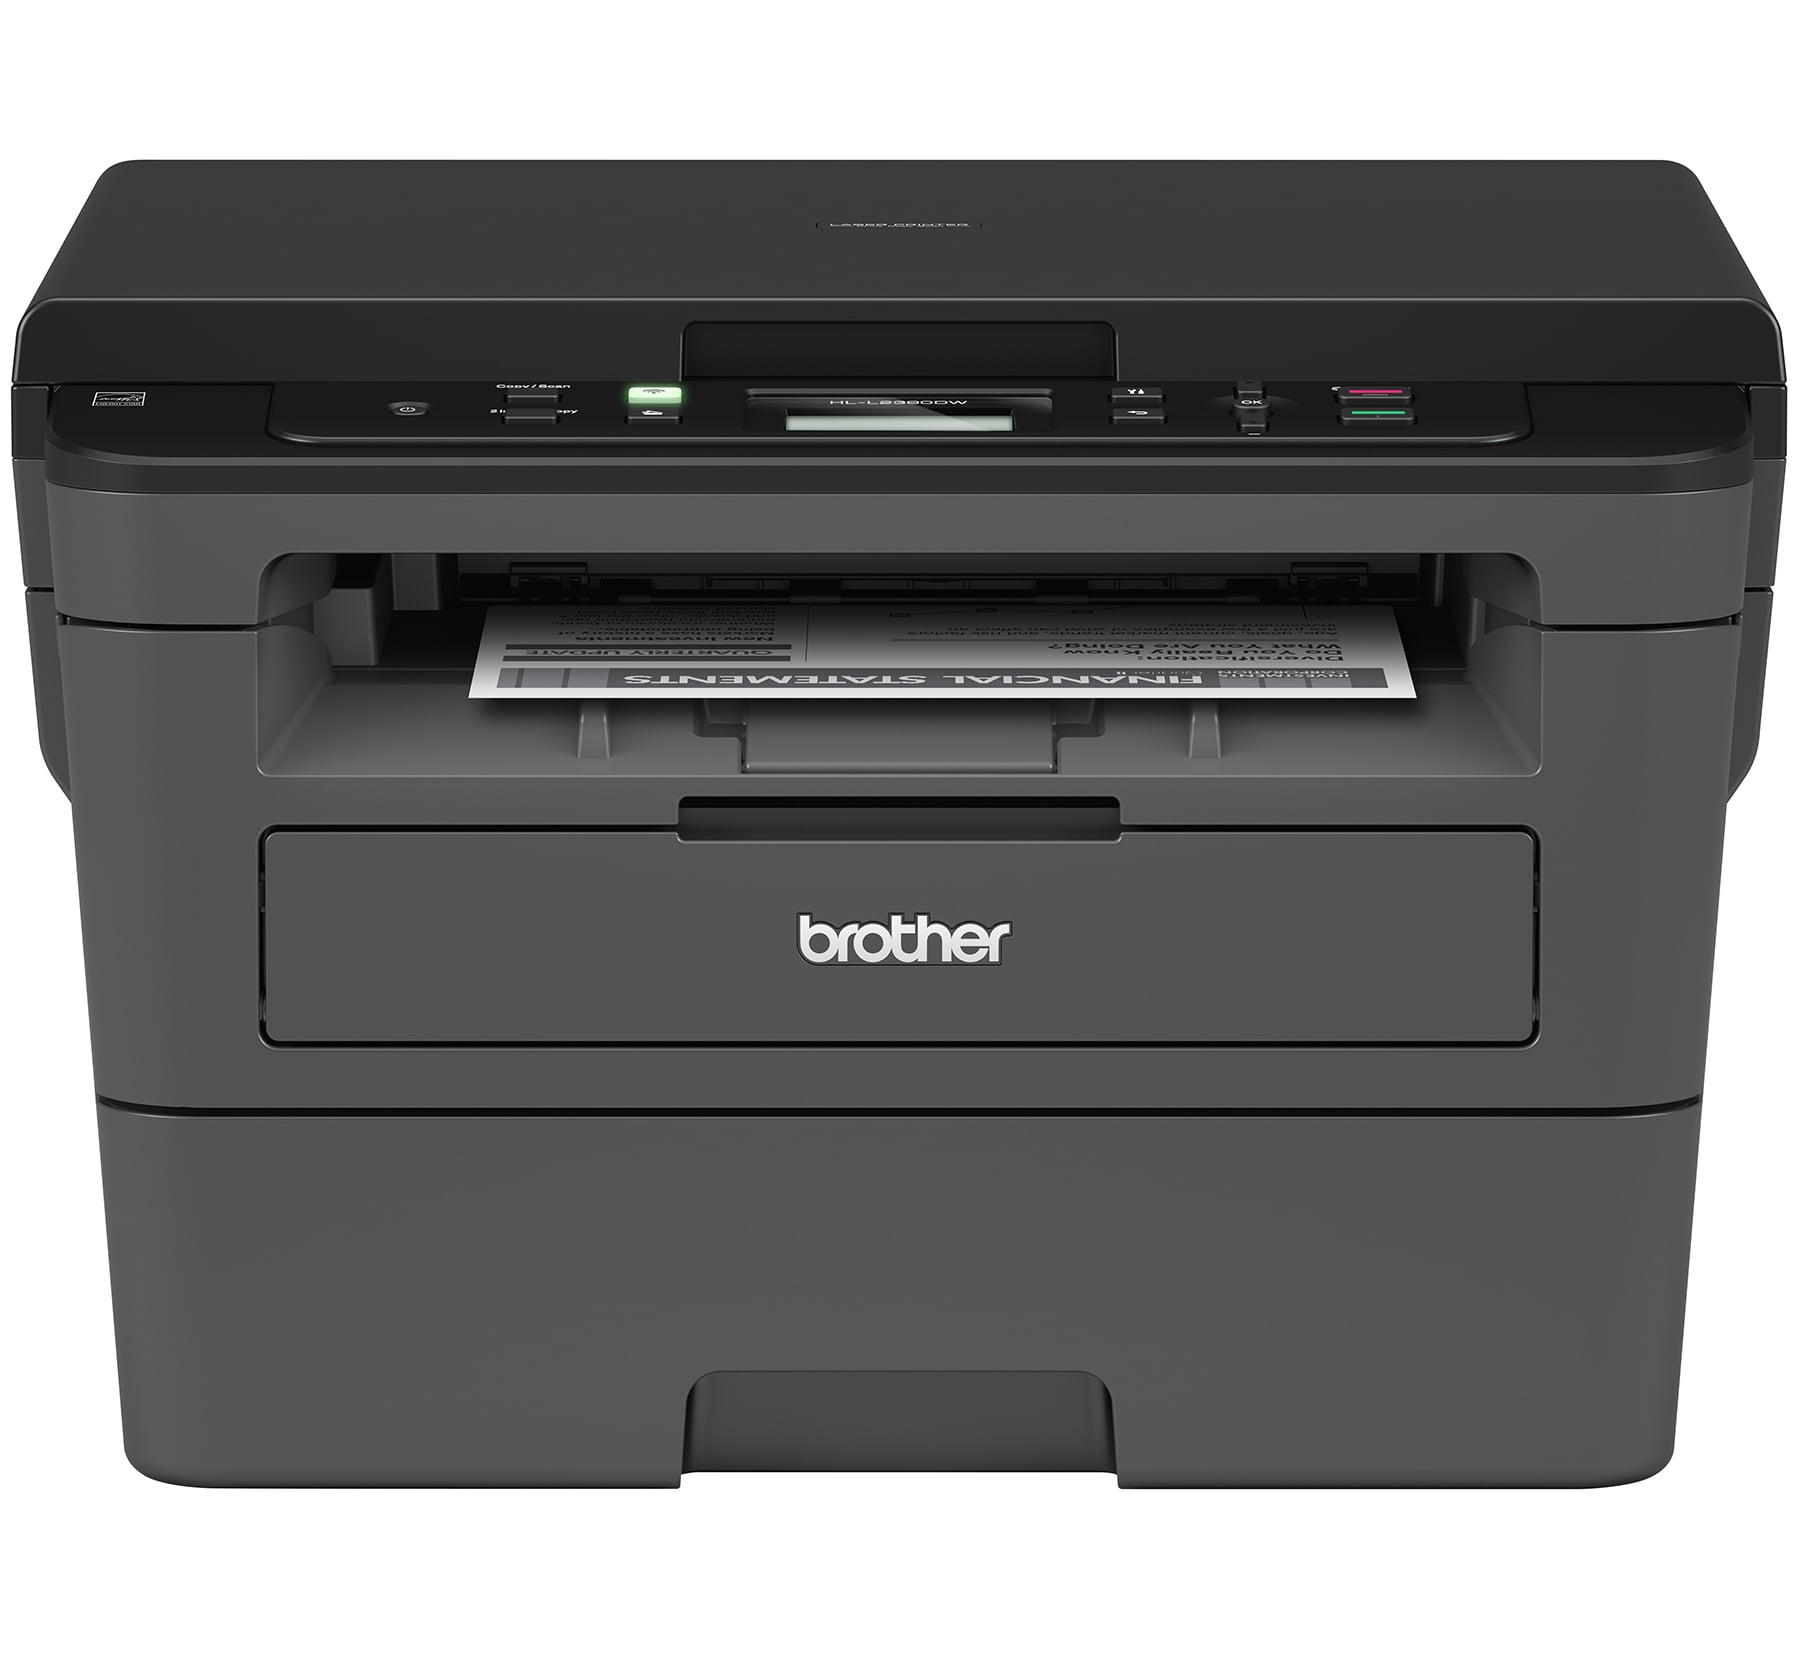 HP OfficeJet Pro 7740 Wide Format All-in-One Color Printer, Print/Copy/Scan/Fax 889894812605